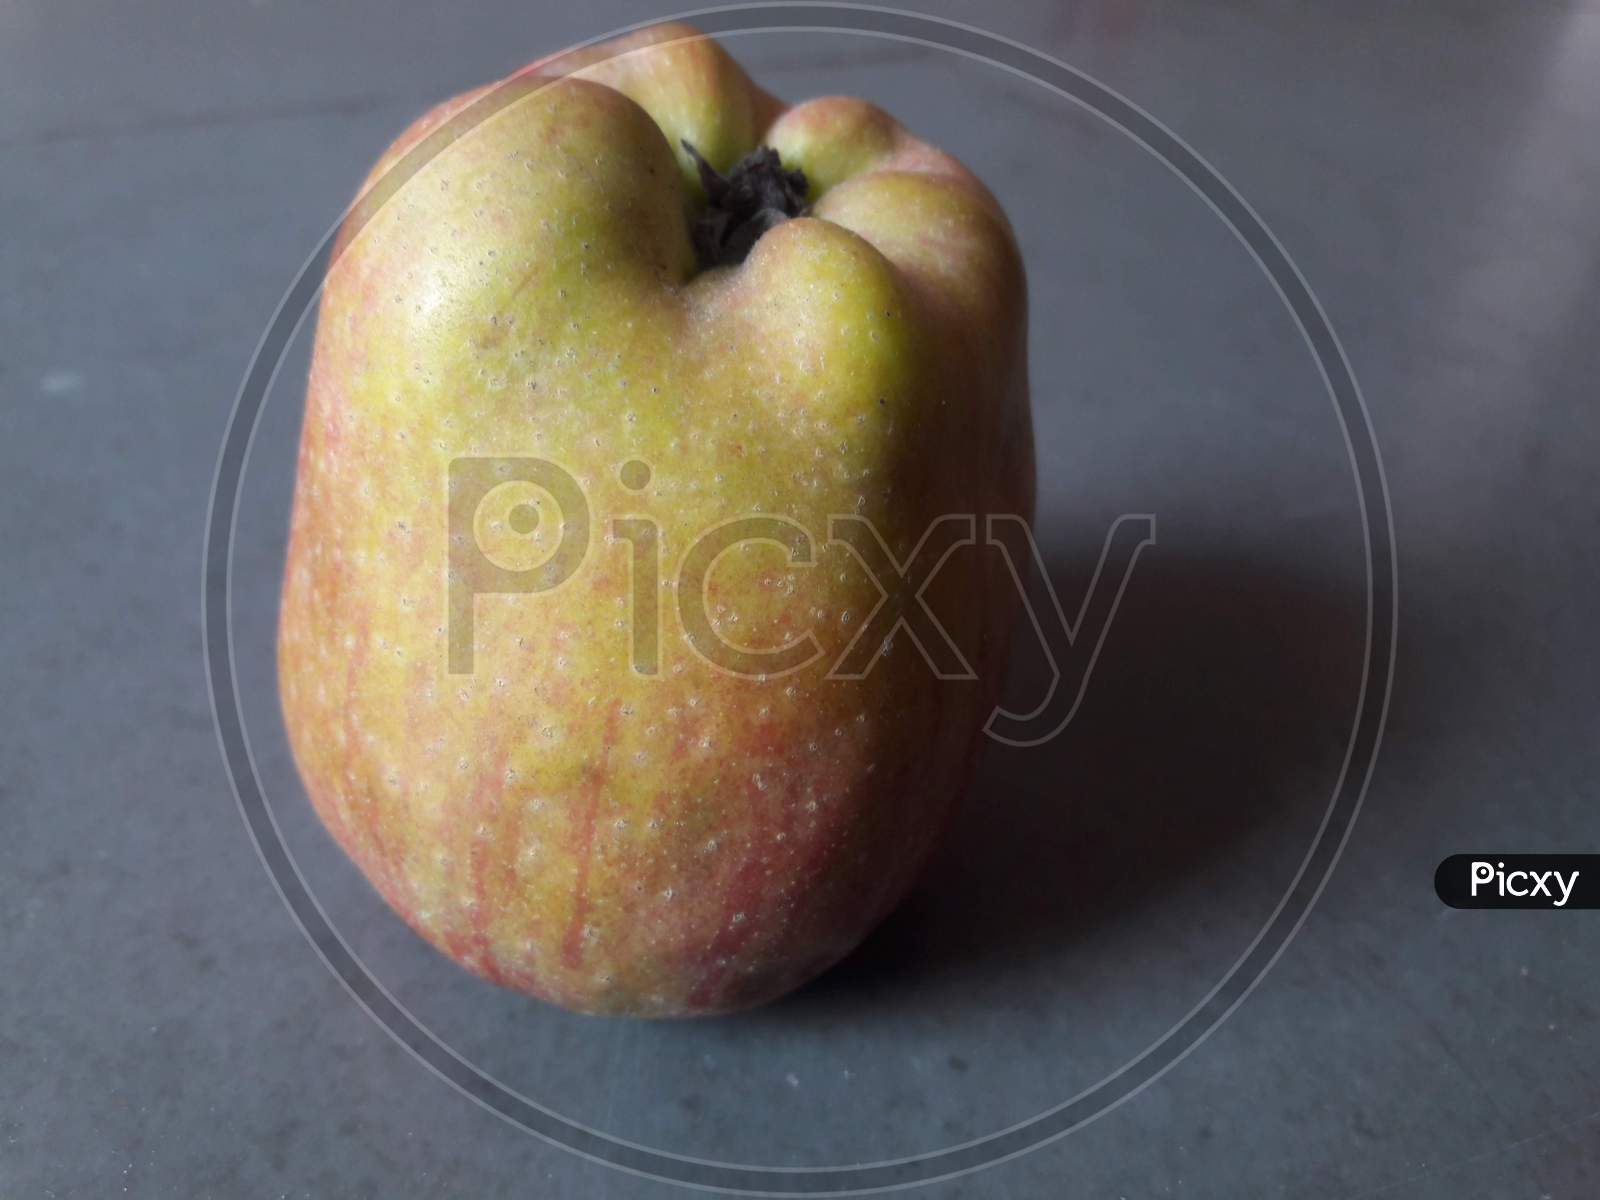 This is an apple fruit